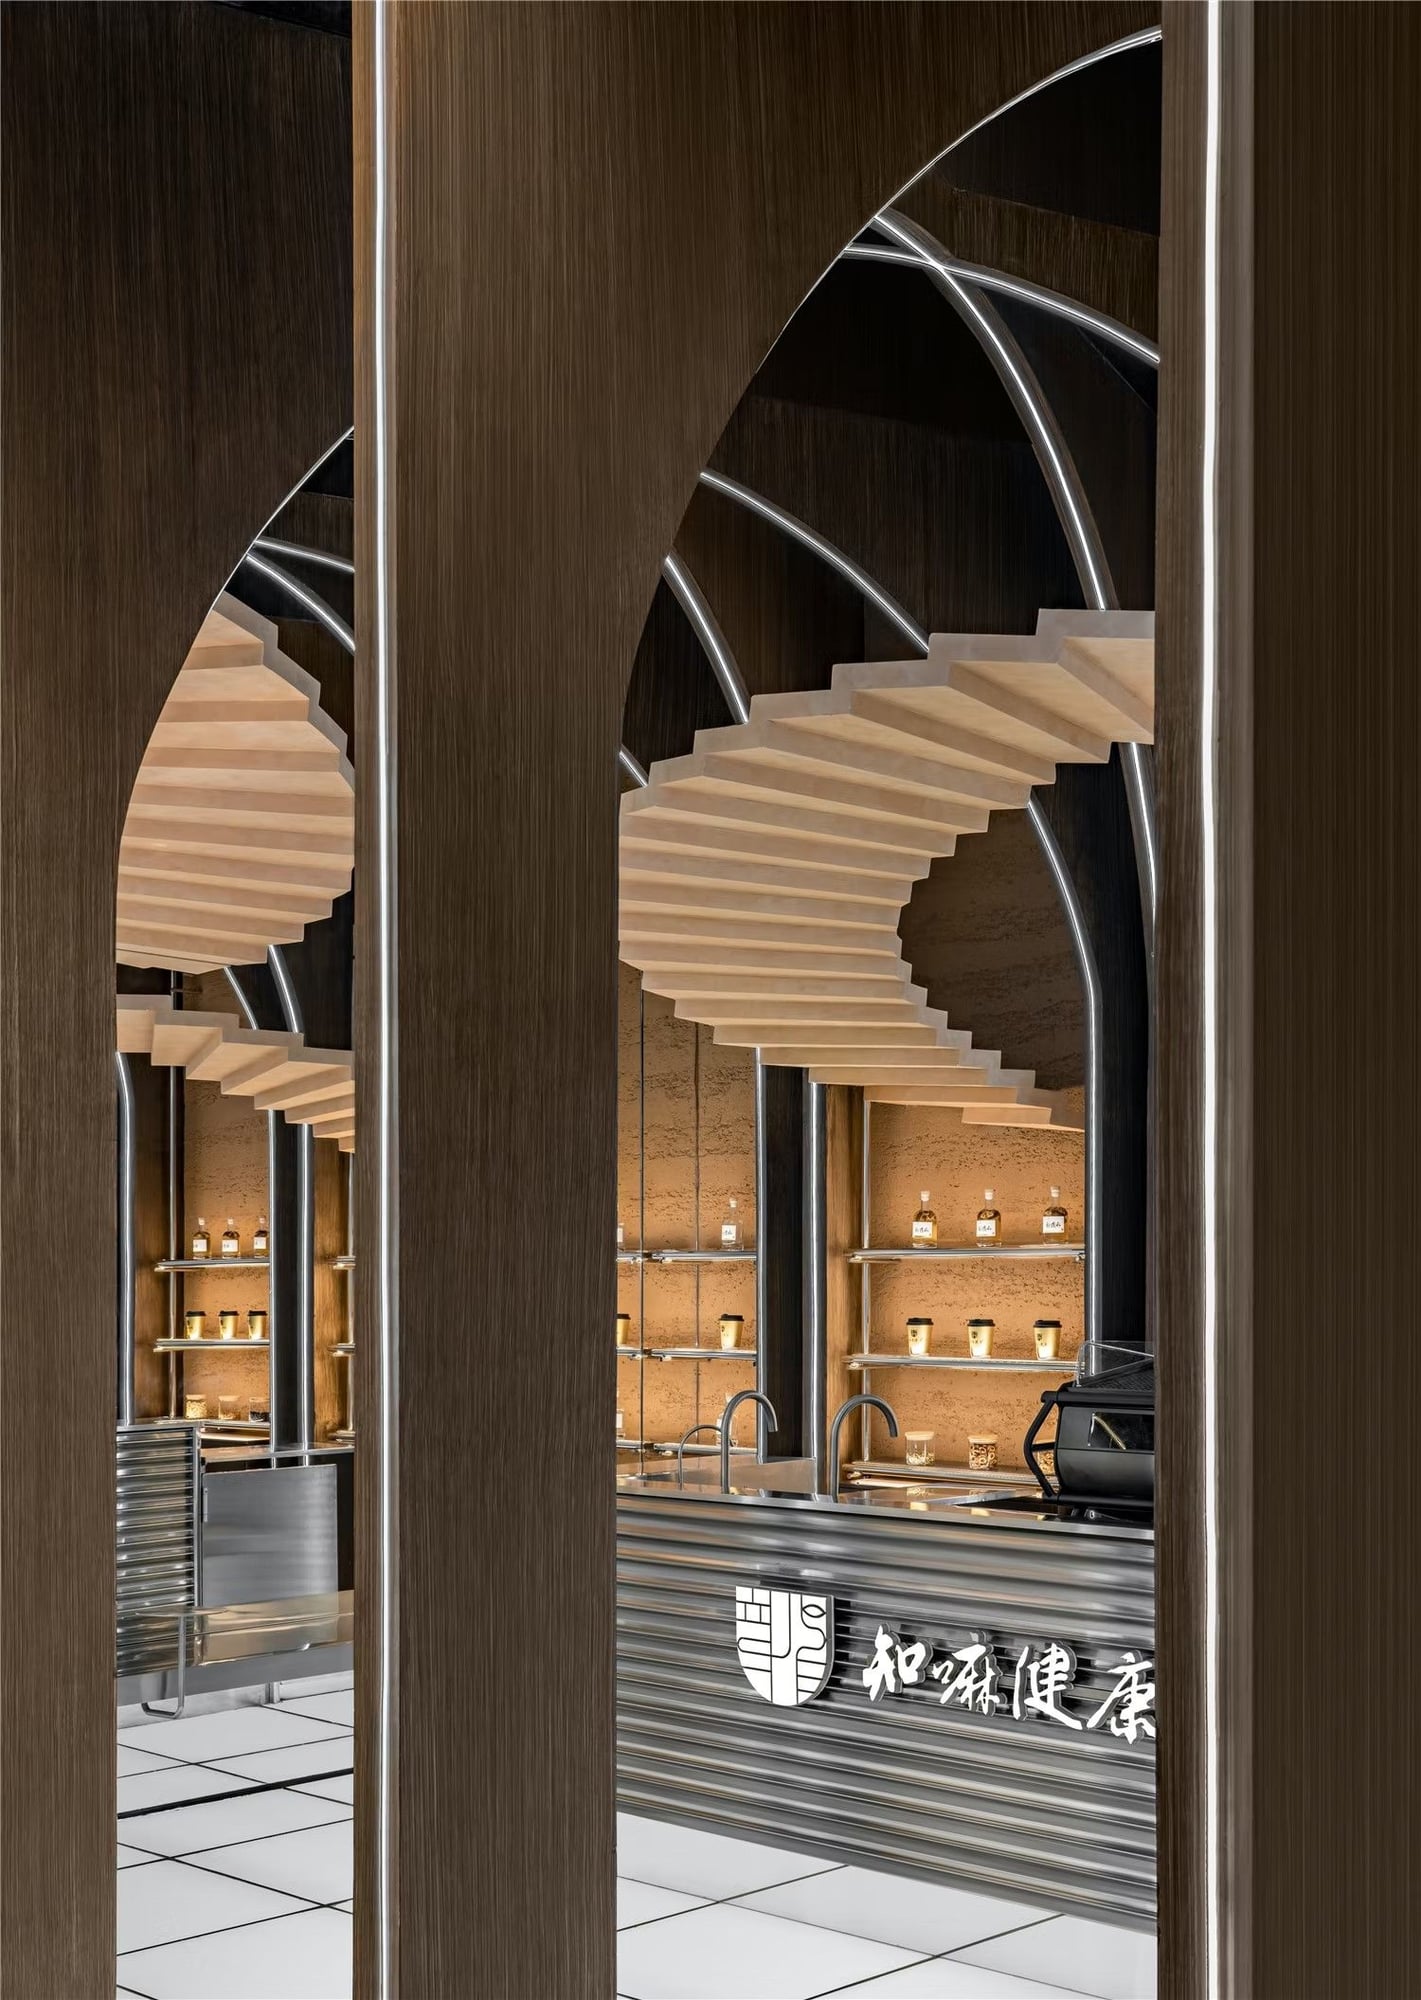 Staircase wraps through archways above the Zhima Health store's bar area.